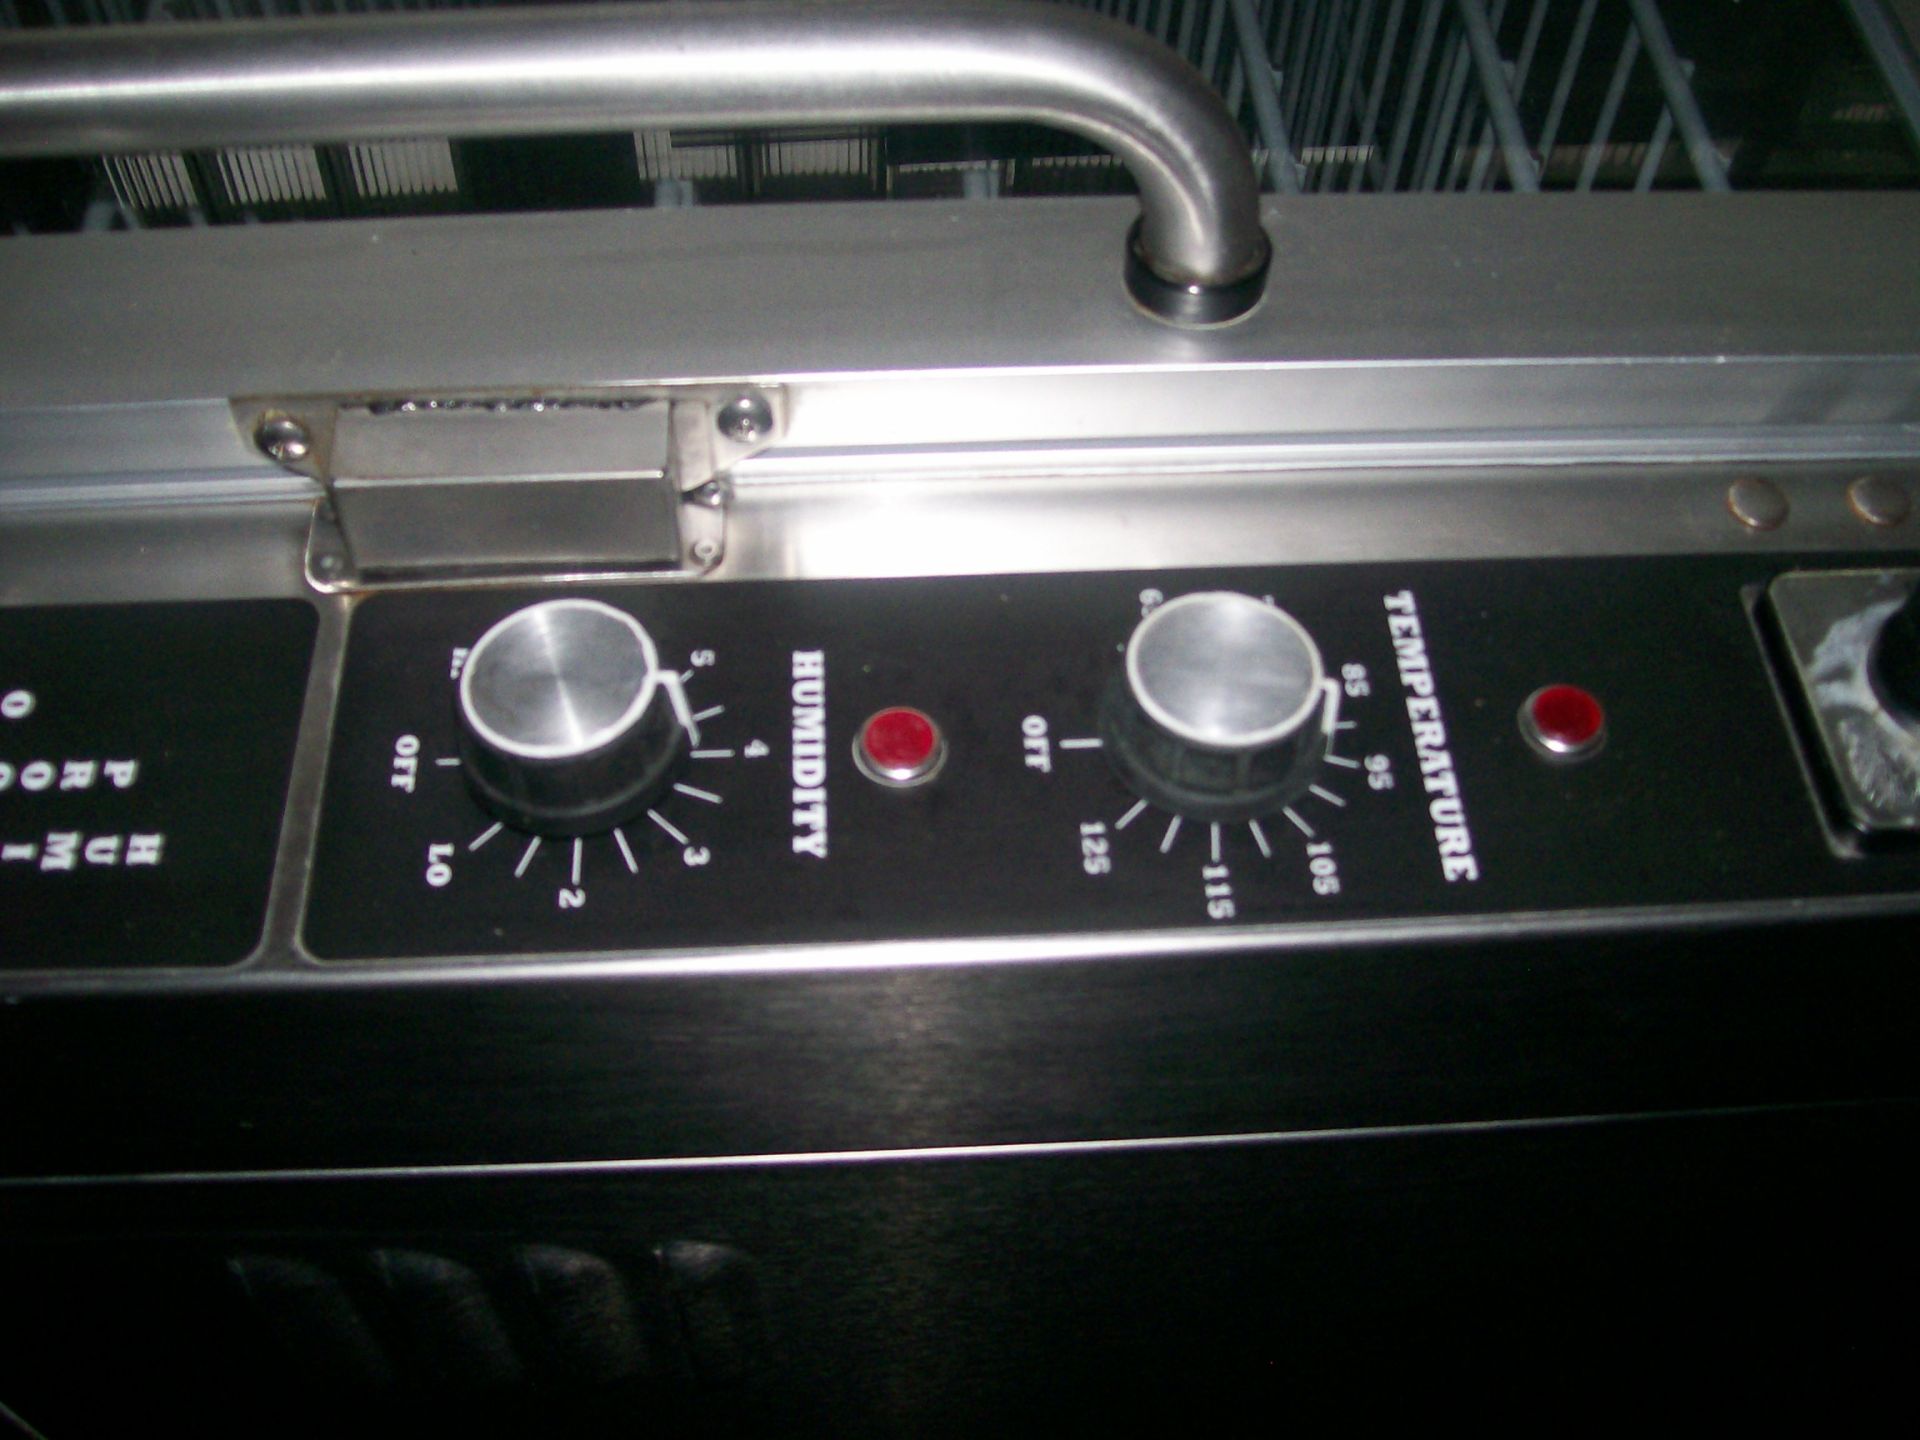 SUPER SYSTEMS PROOFER & OVEN MDL08-4-JJ; SN 11846 W/HUMIDITY; TOPIS OVEN 100-145 DEGREES BOTTOM - Image 3 of 8